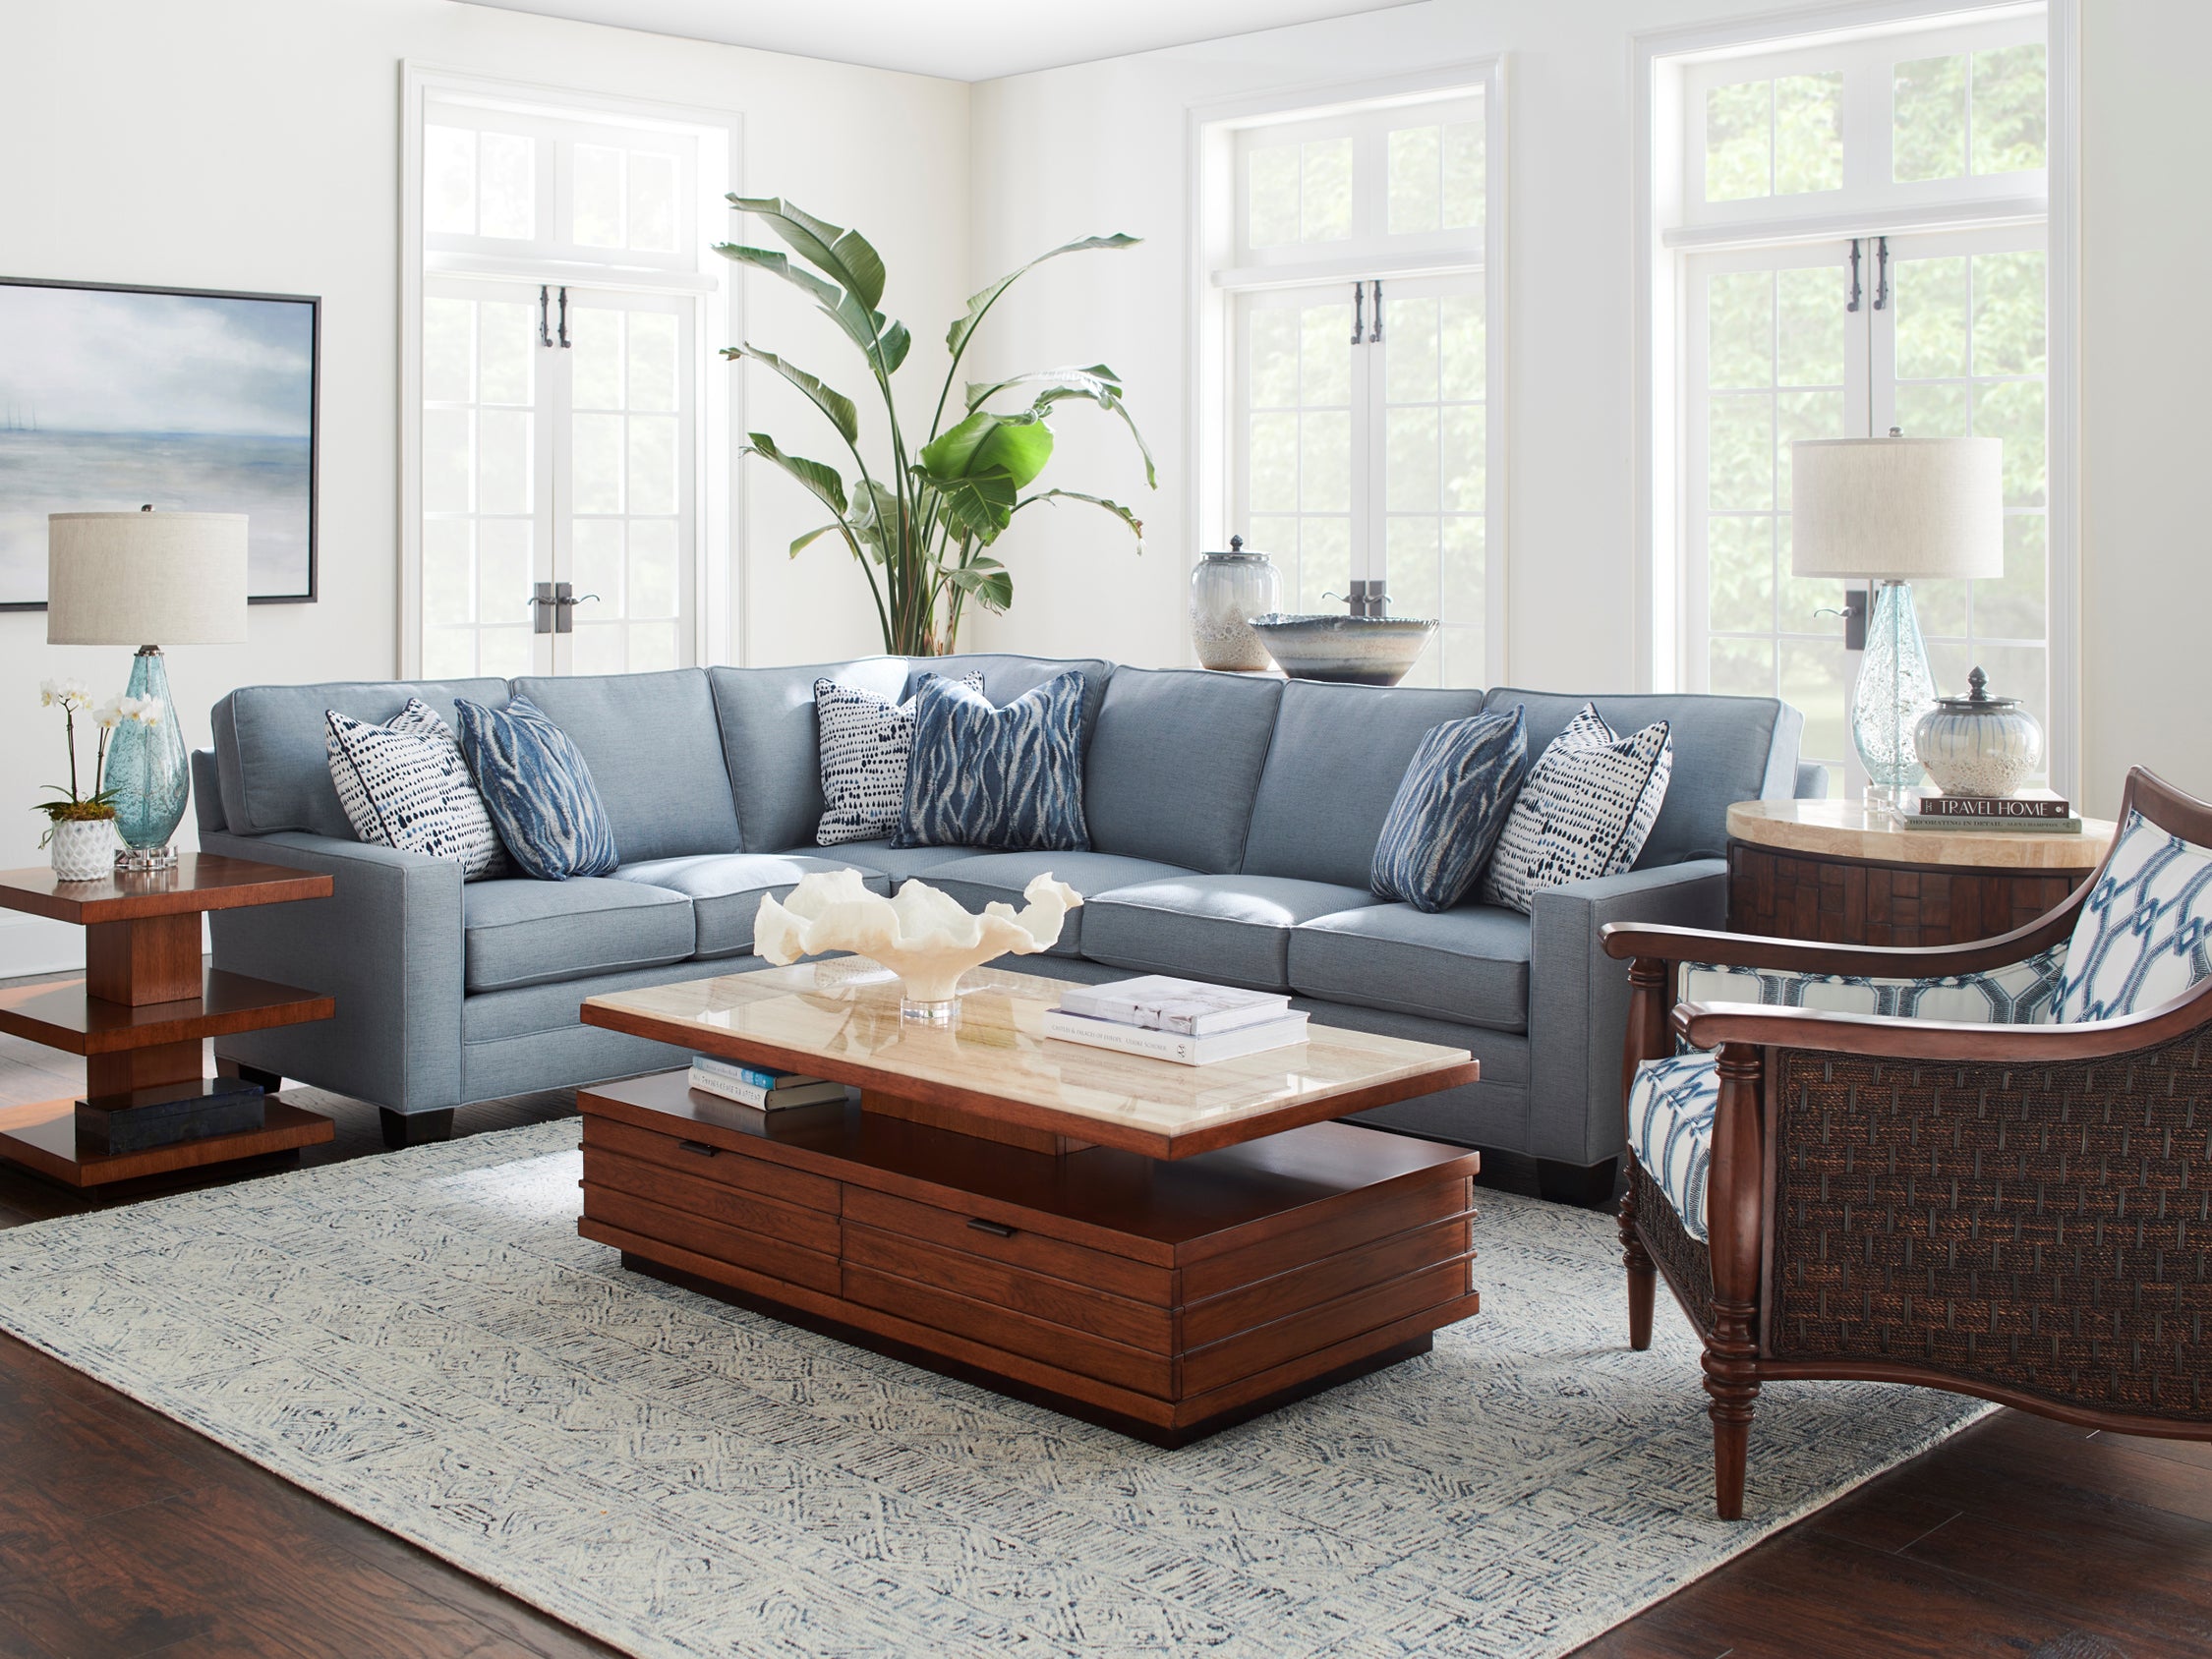 A living room scene from Tommy Bahama Home's Ocean Club collection featuring a large blue fabric sectional sofa and dark wood occasional tables.